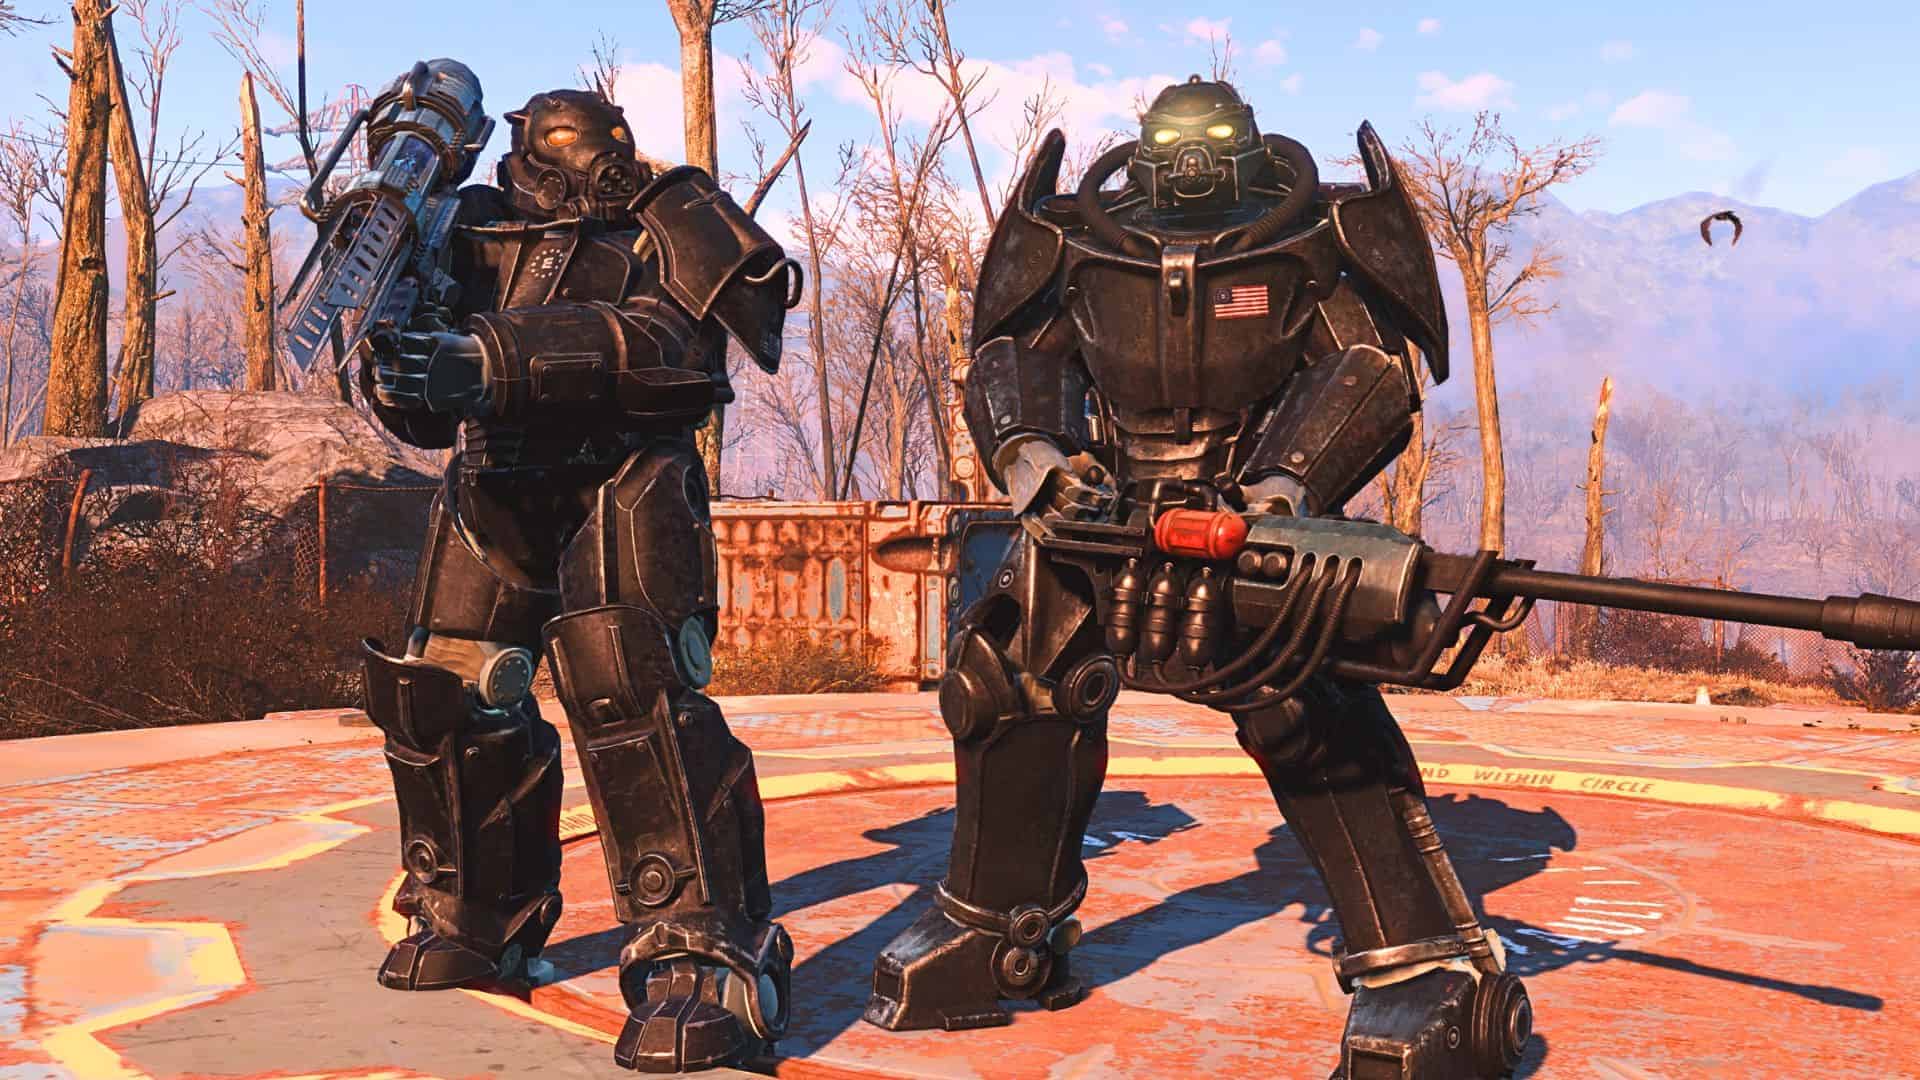 Two people in power armor suits standing in a post-apocalyptic landscape, one wielding a large gun, captured with the best graphics settings for Fallout 4.